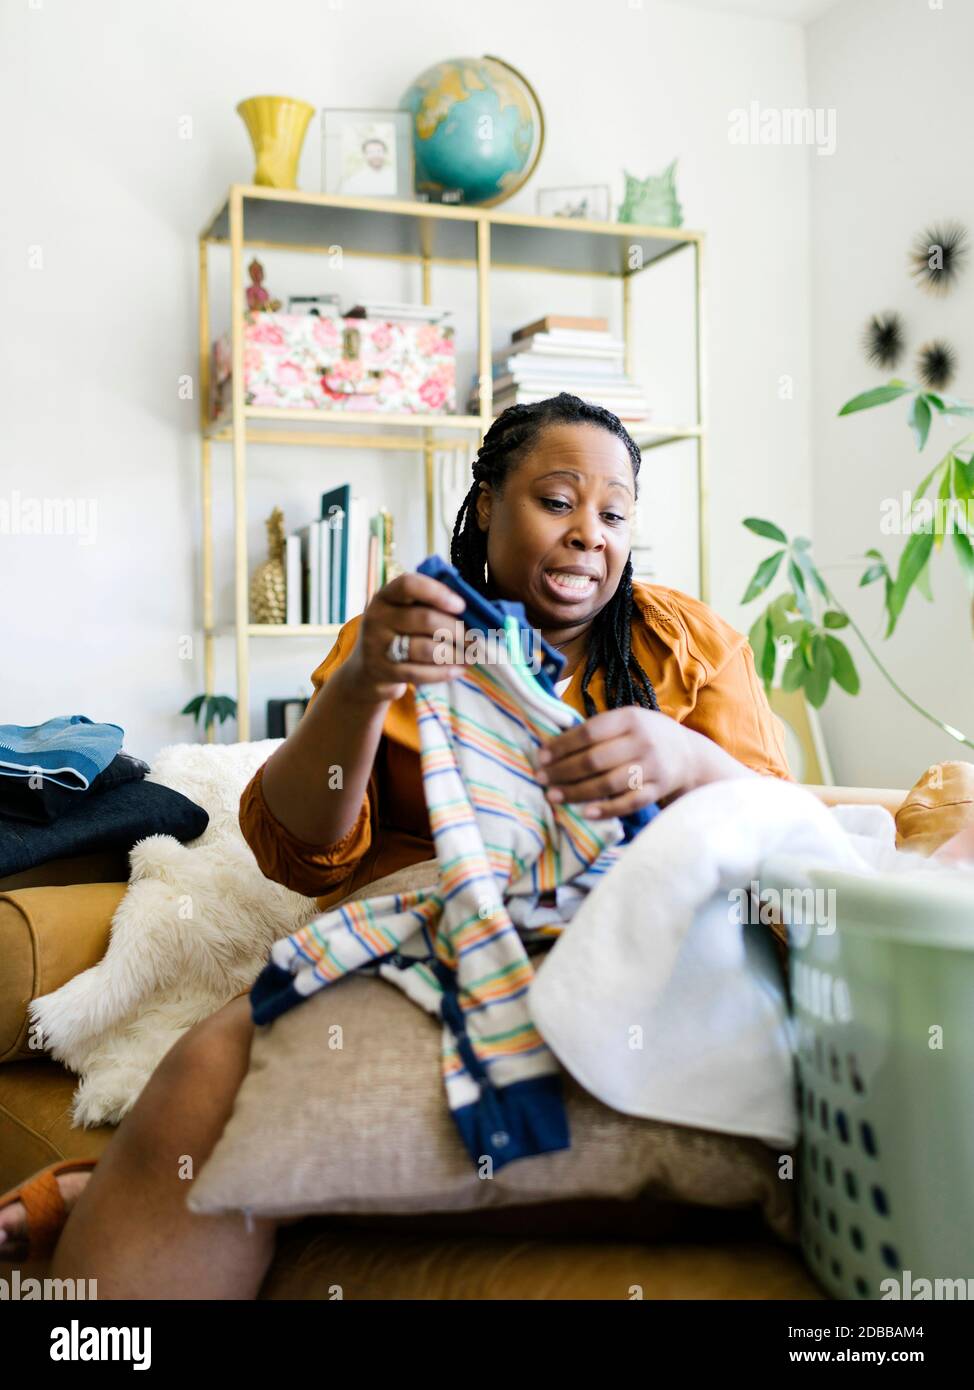 Woman folding baby clothing at home Stock Photo